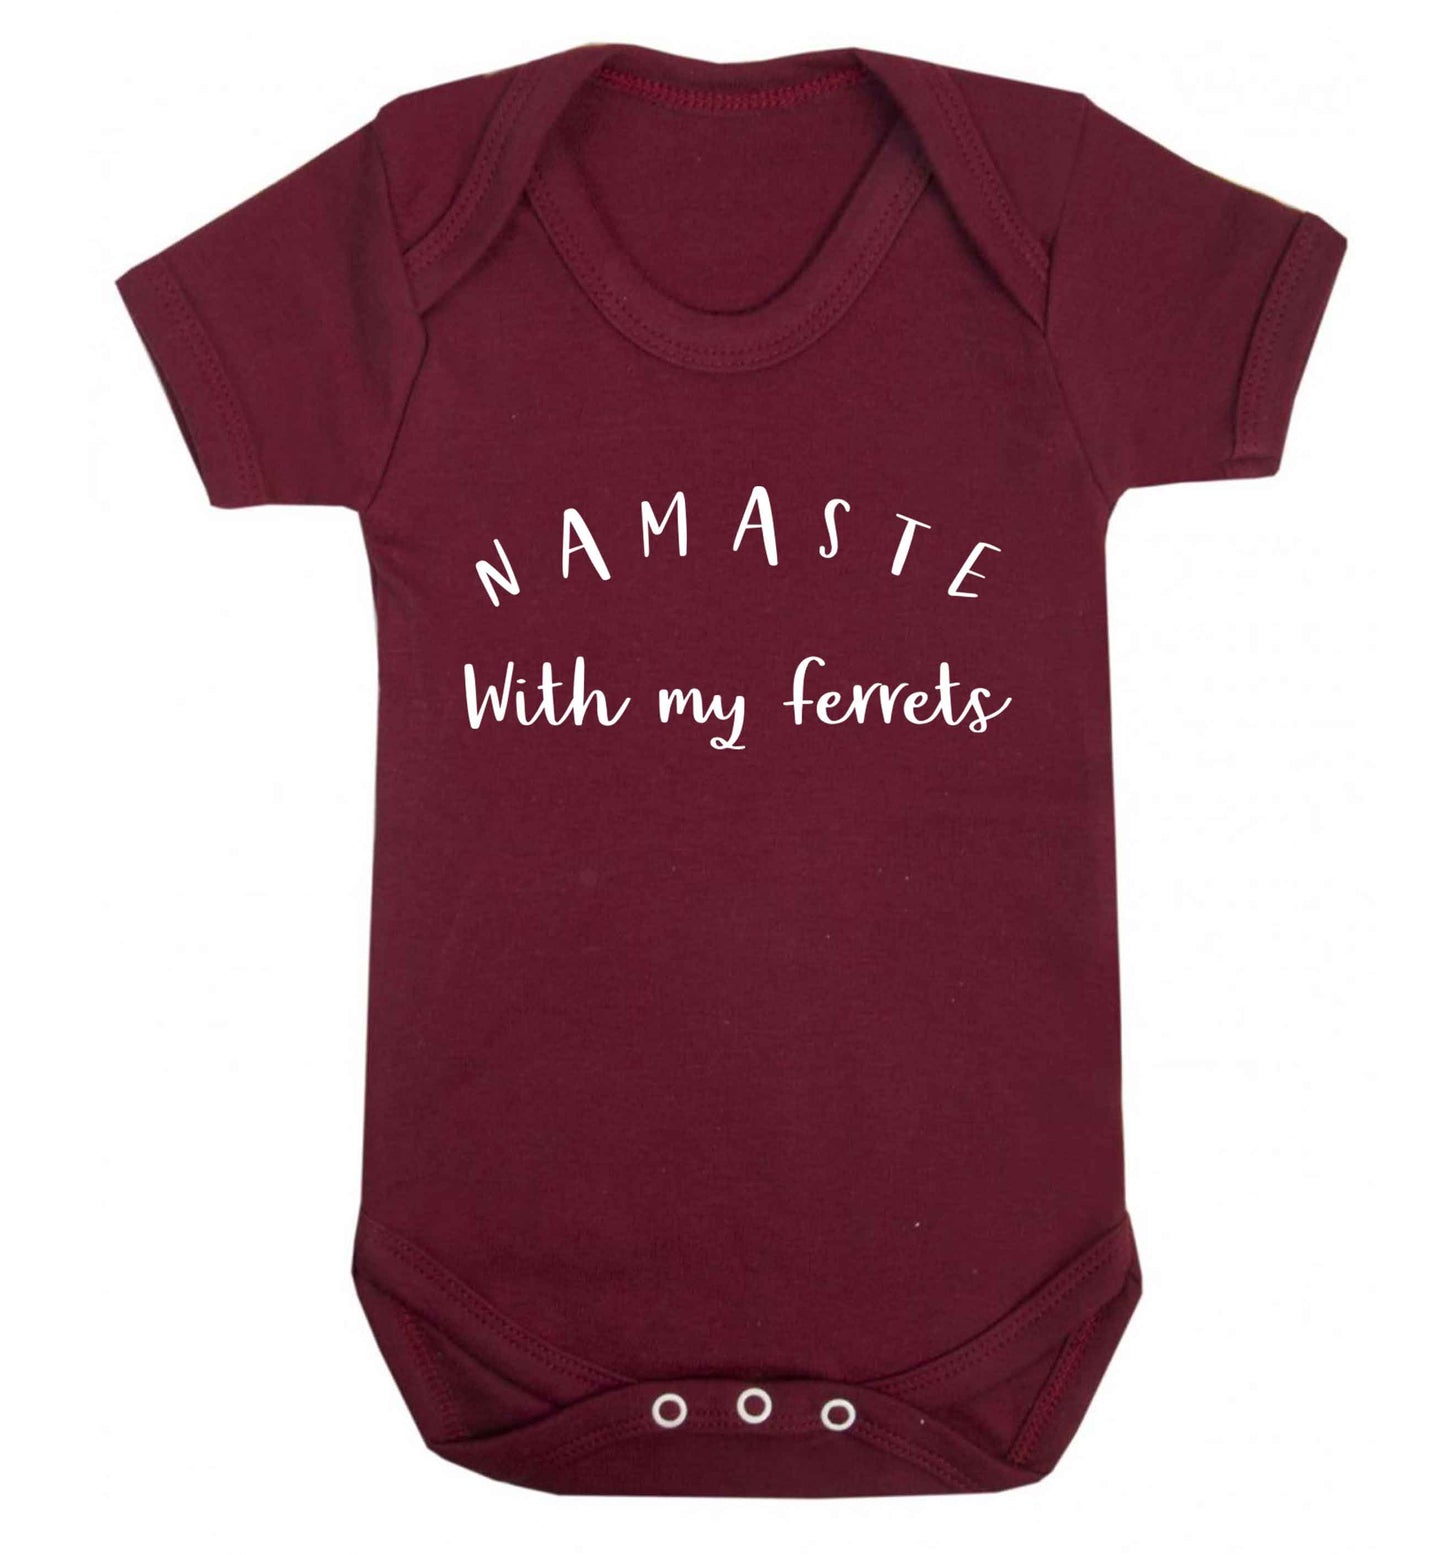 Namaste with my ferrets Baby Vest maroon 18-24 months